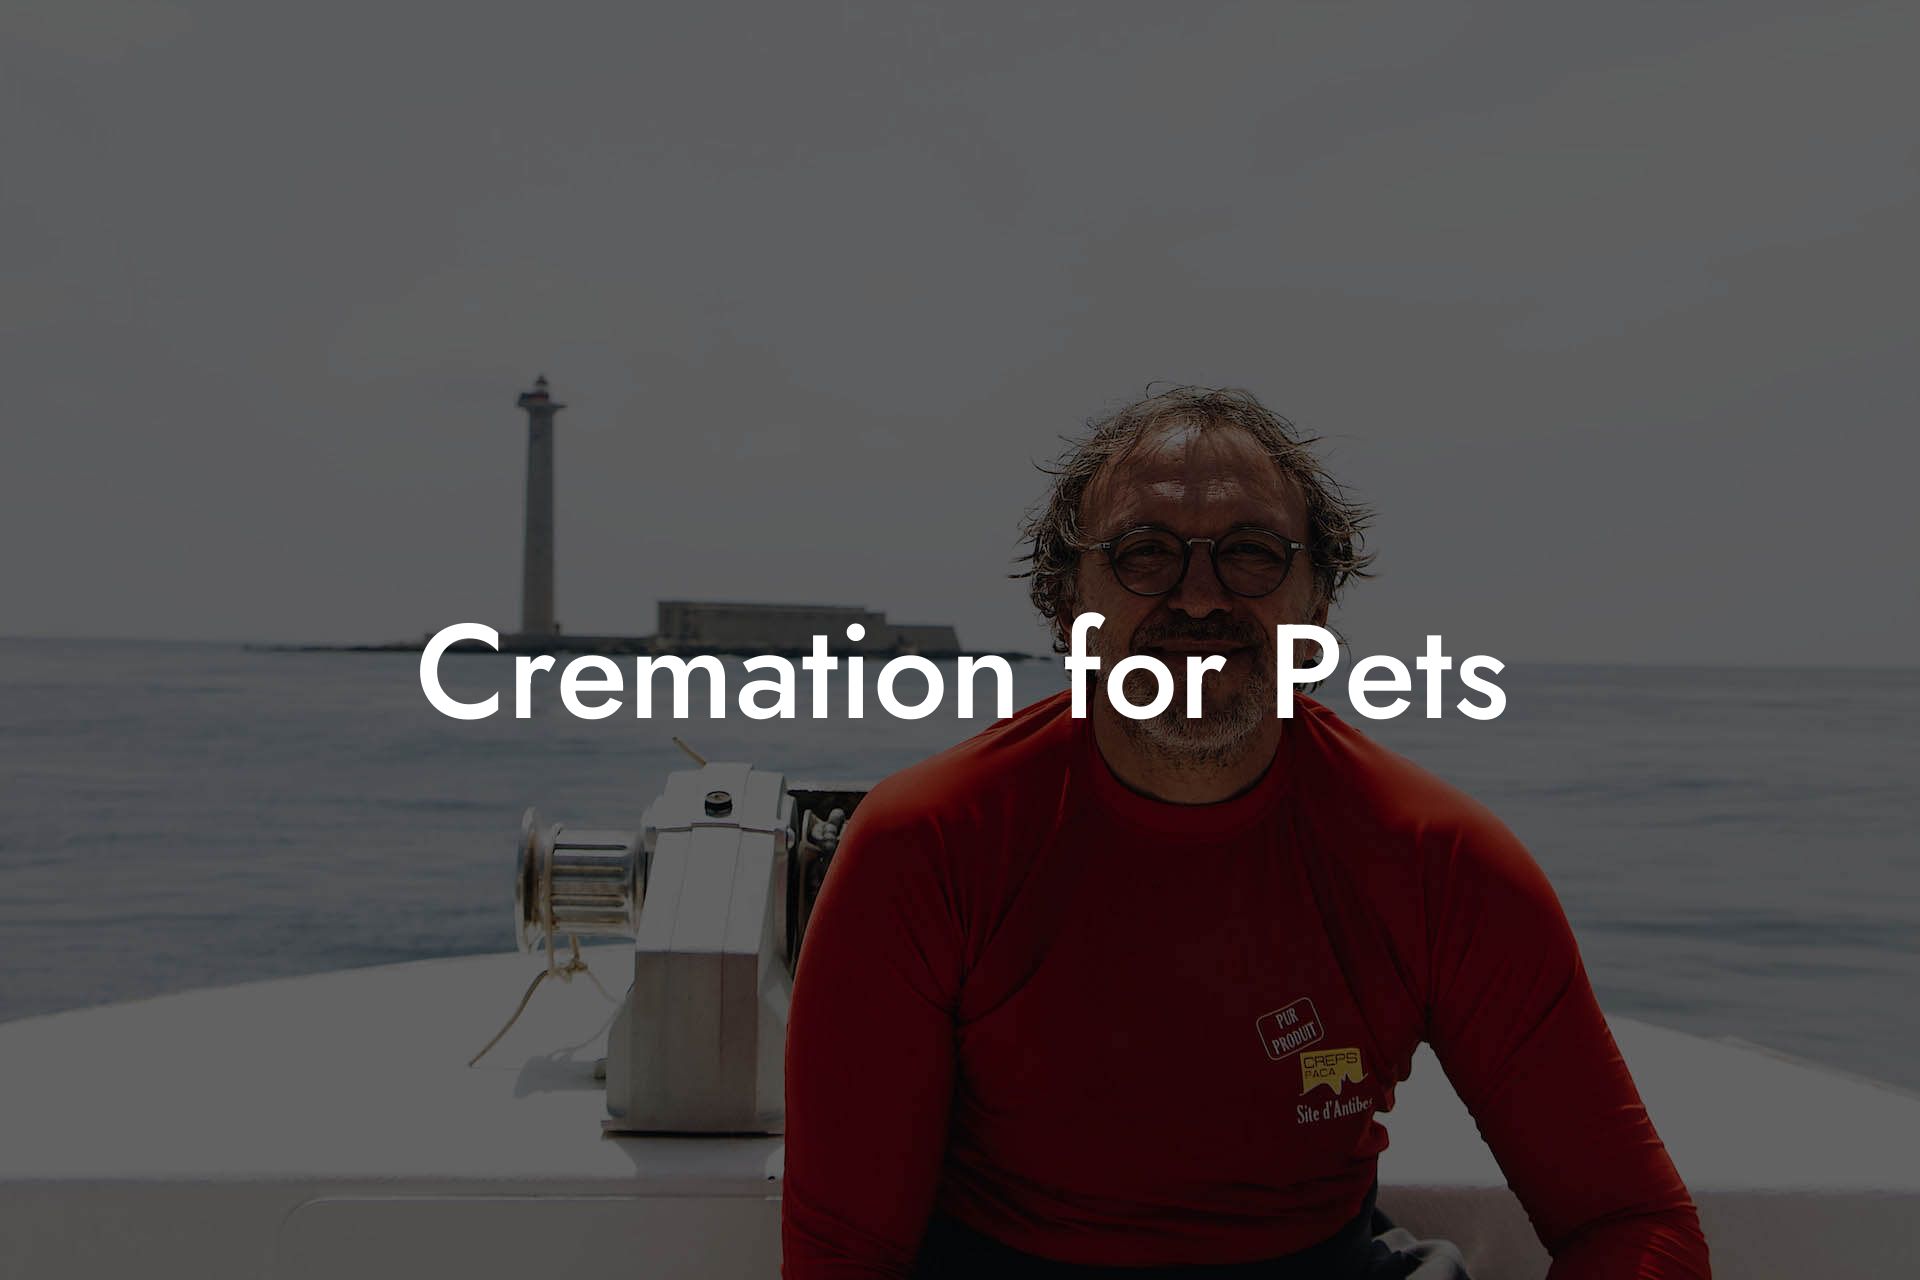 Cremation for Pets